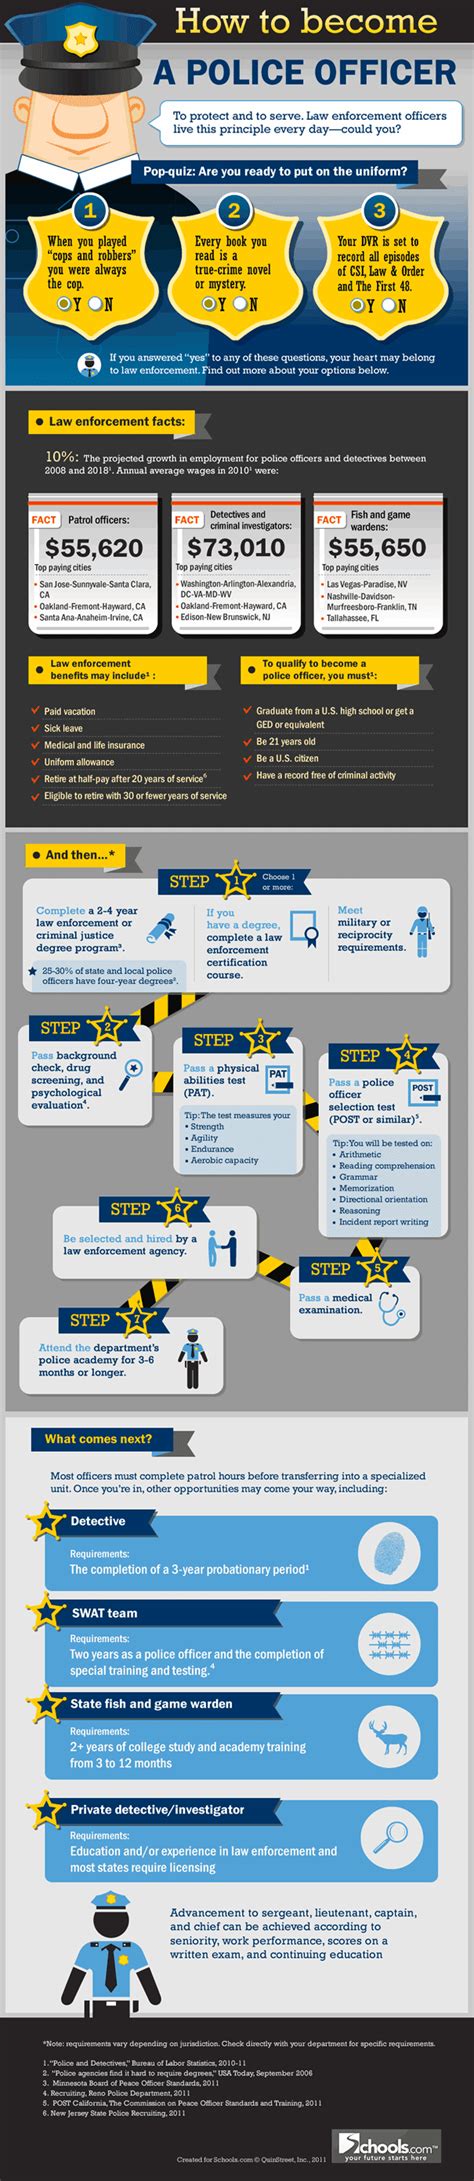 How To Become A Police Officer Infographic Visualistan